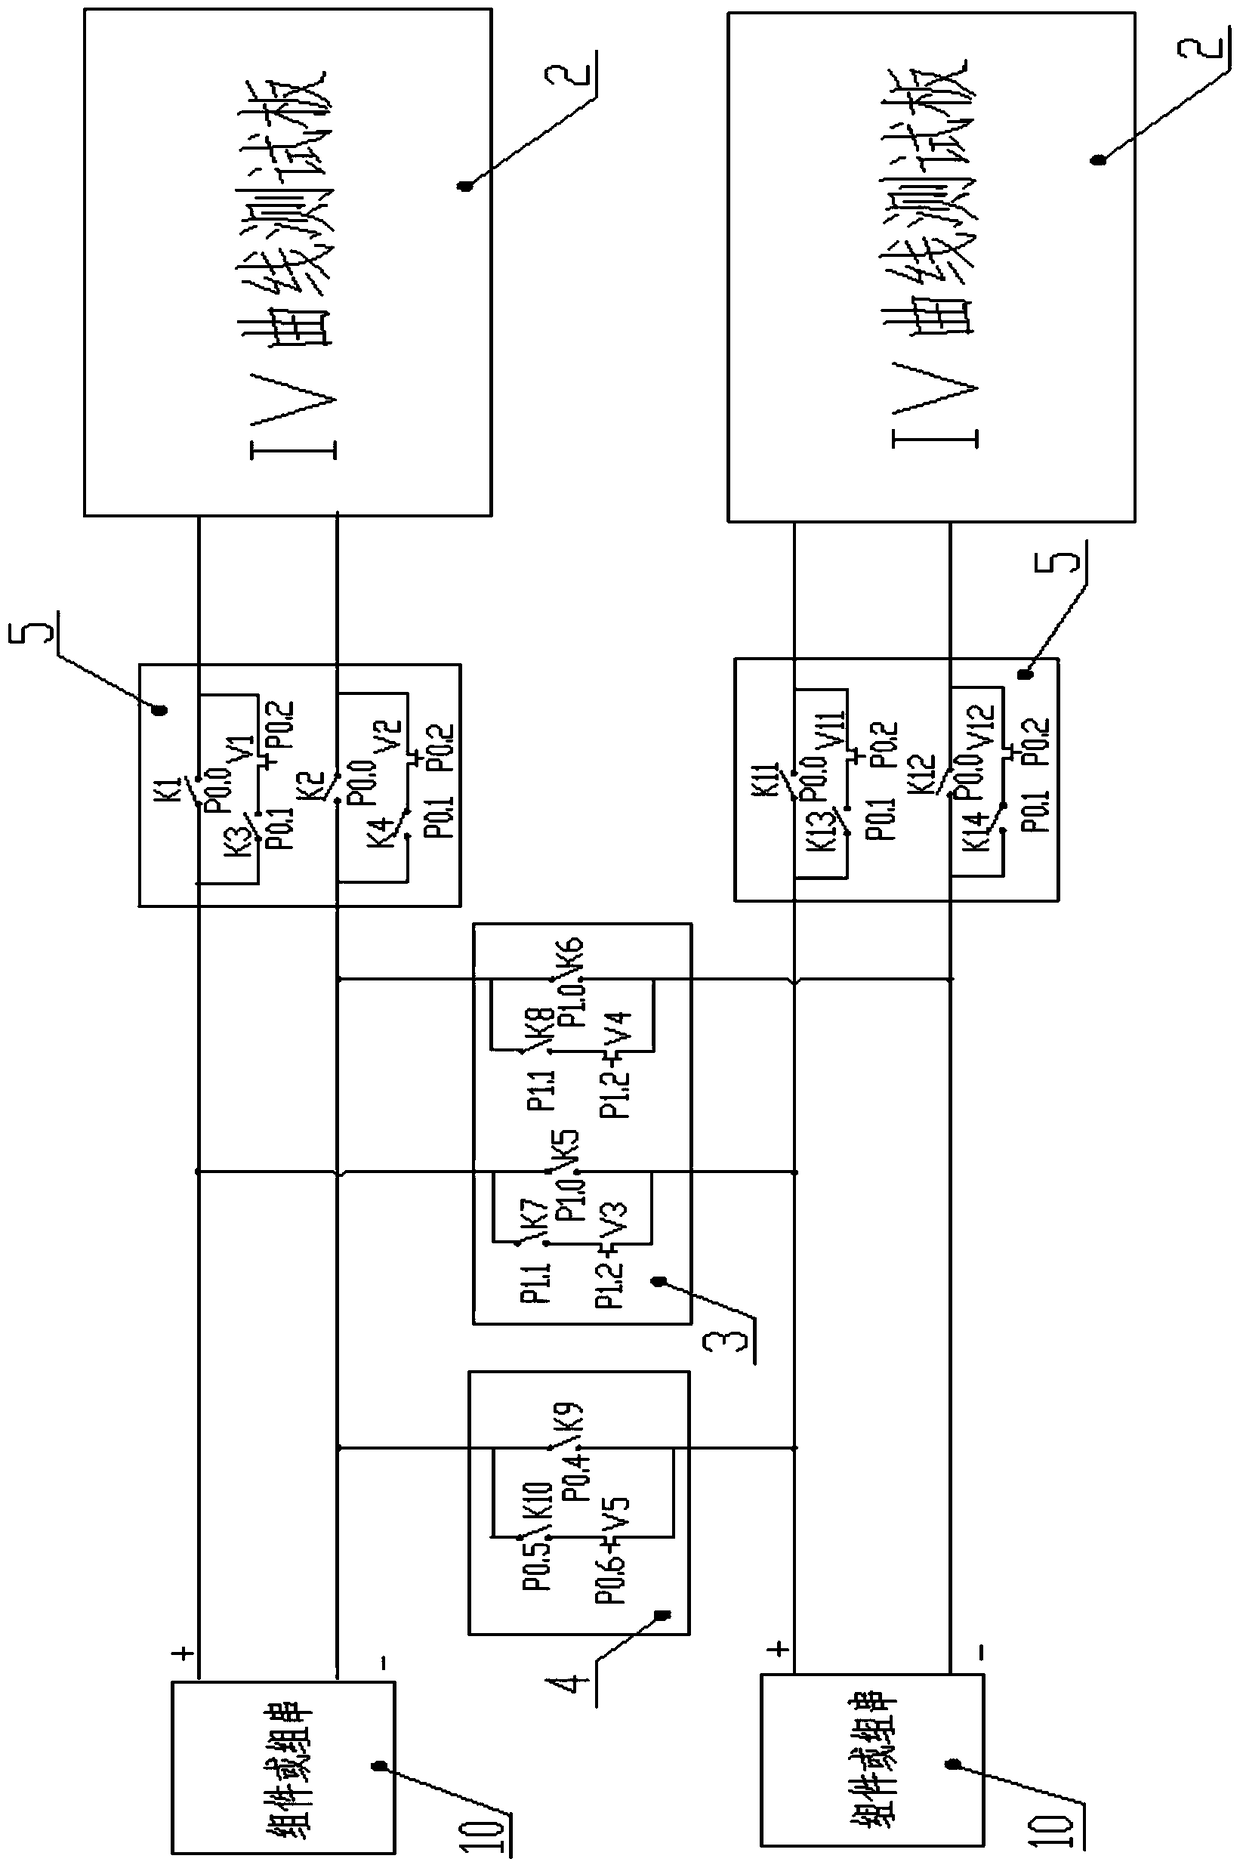 A series-parallel mismatch loss rate test device and test method for a photovoltaic system